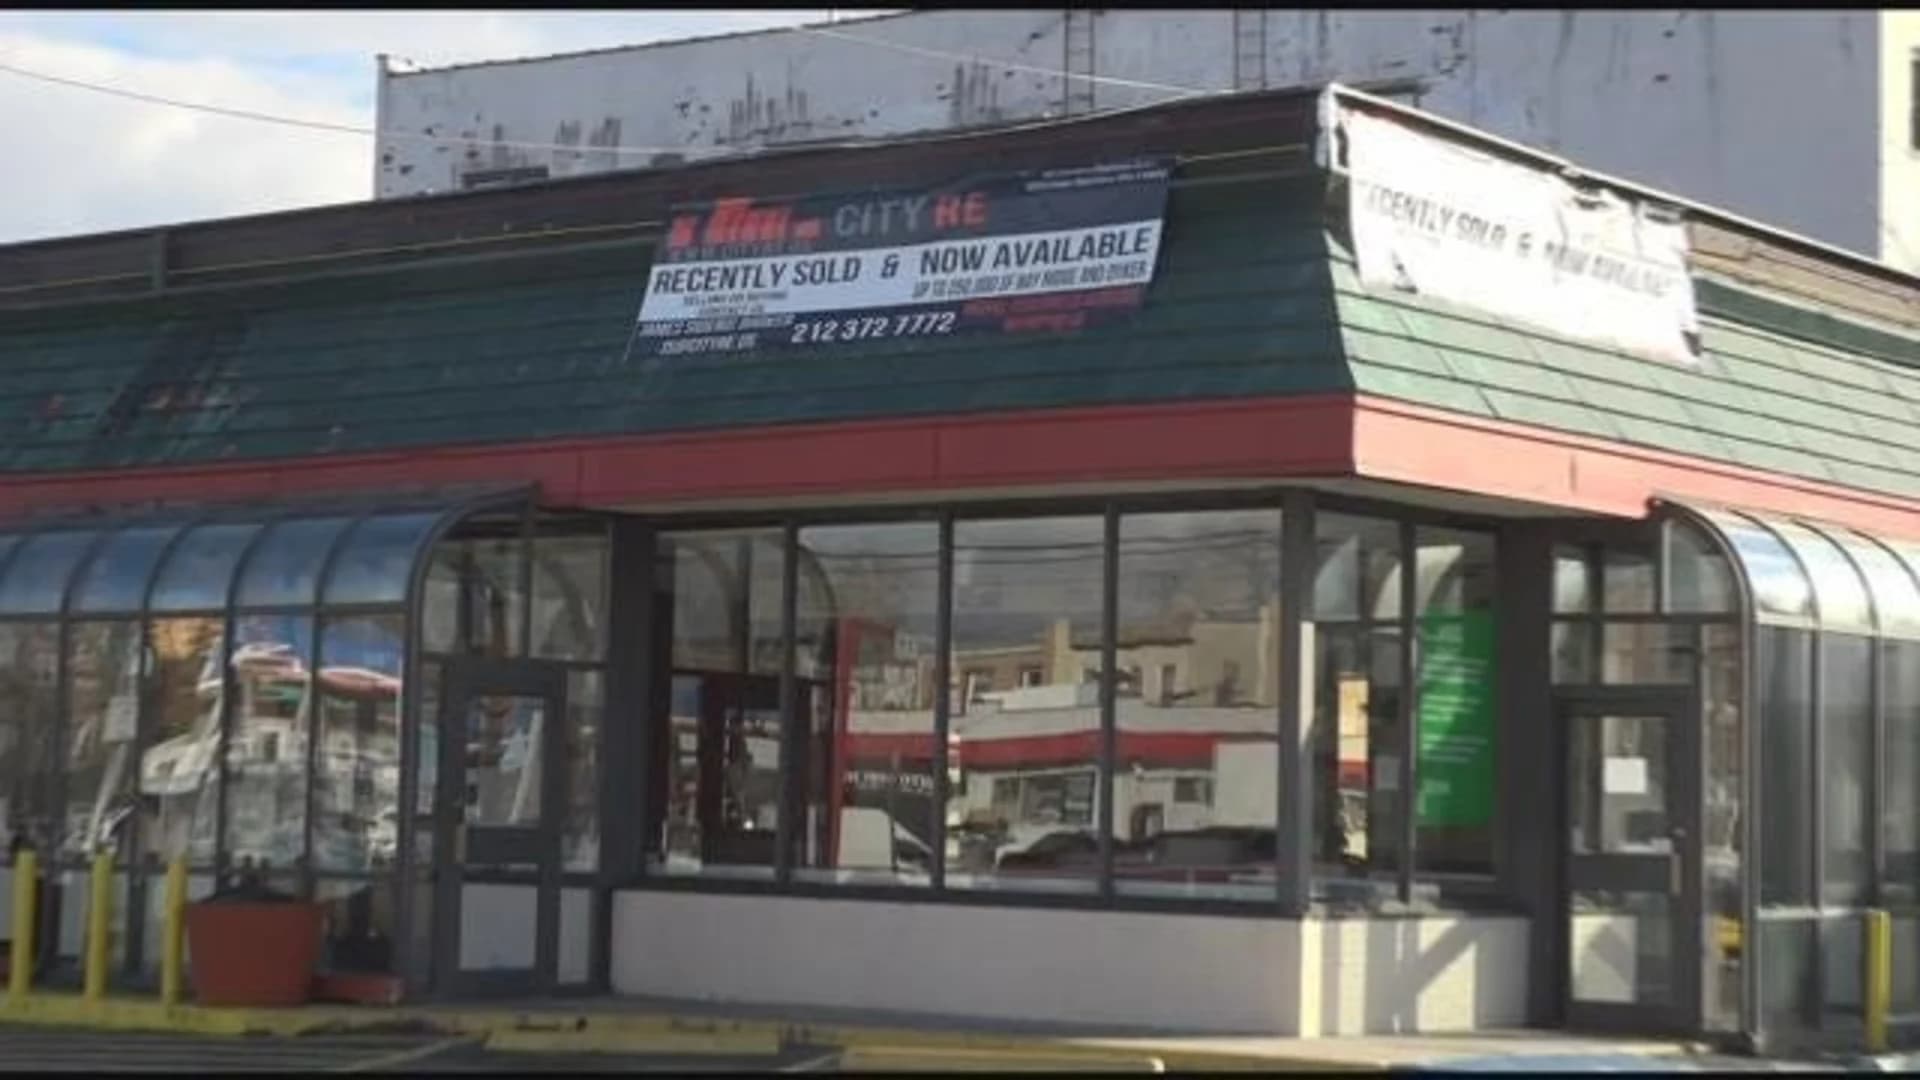 Plan to convert Nathan's into a school draws community backlash